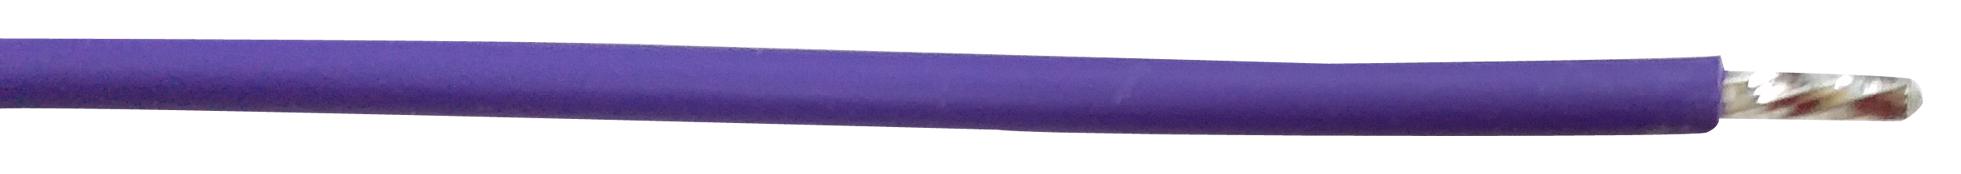 PP002422 HOOK-UP WIRE, 26AWG, PURPLE, 305M, 30V PRO POWER